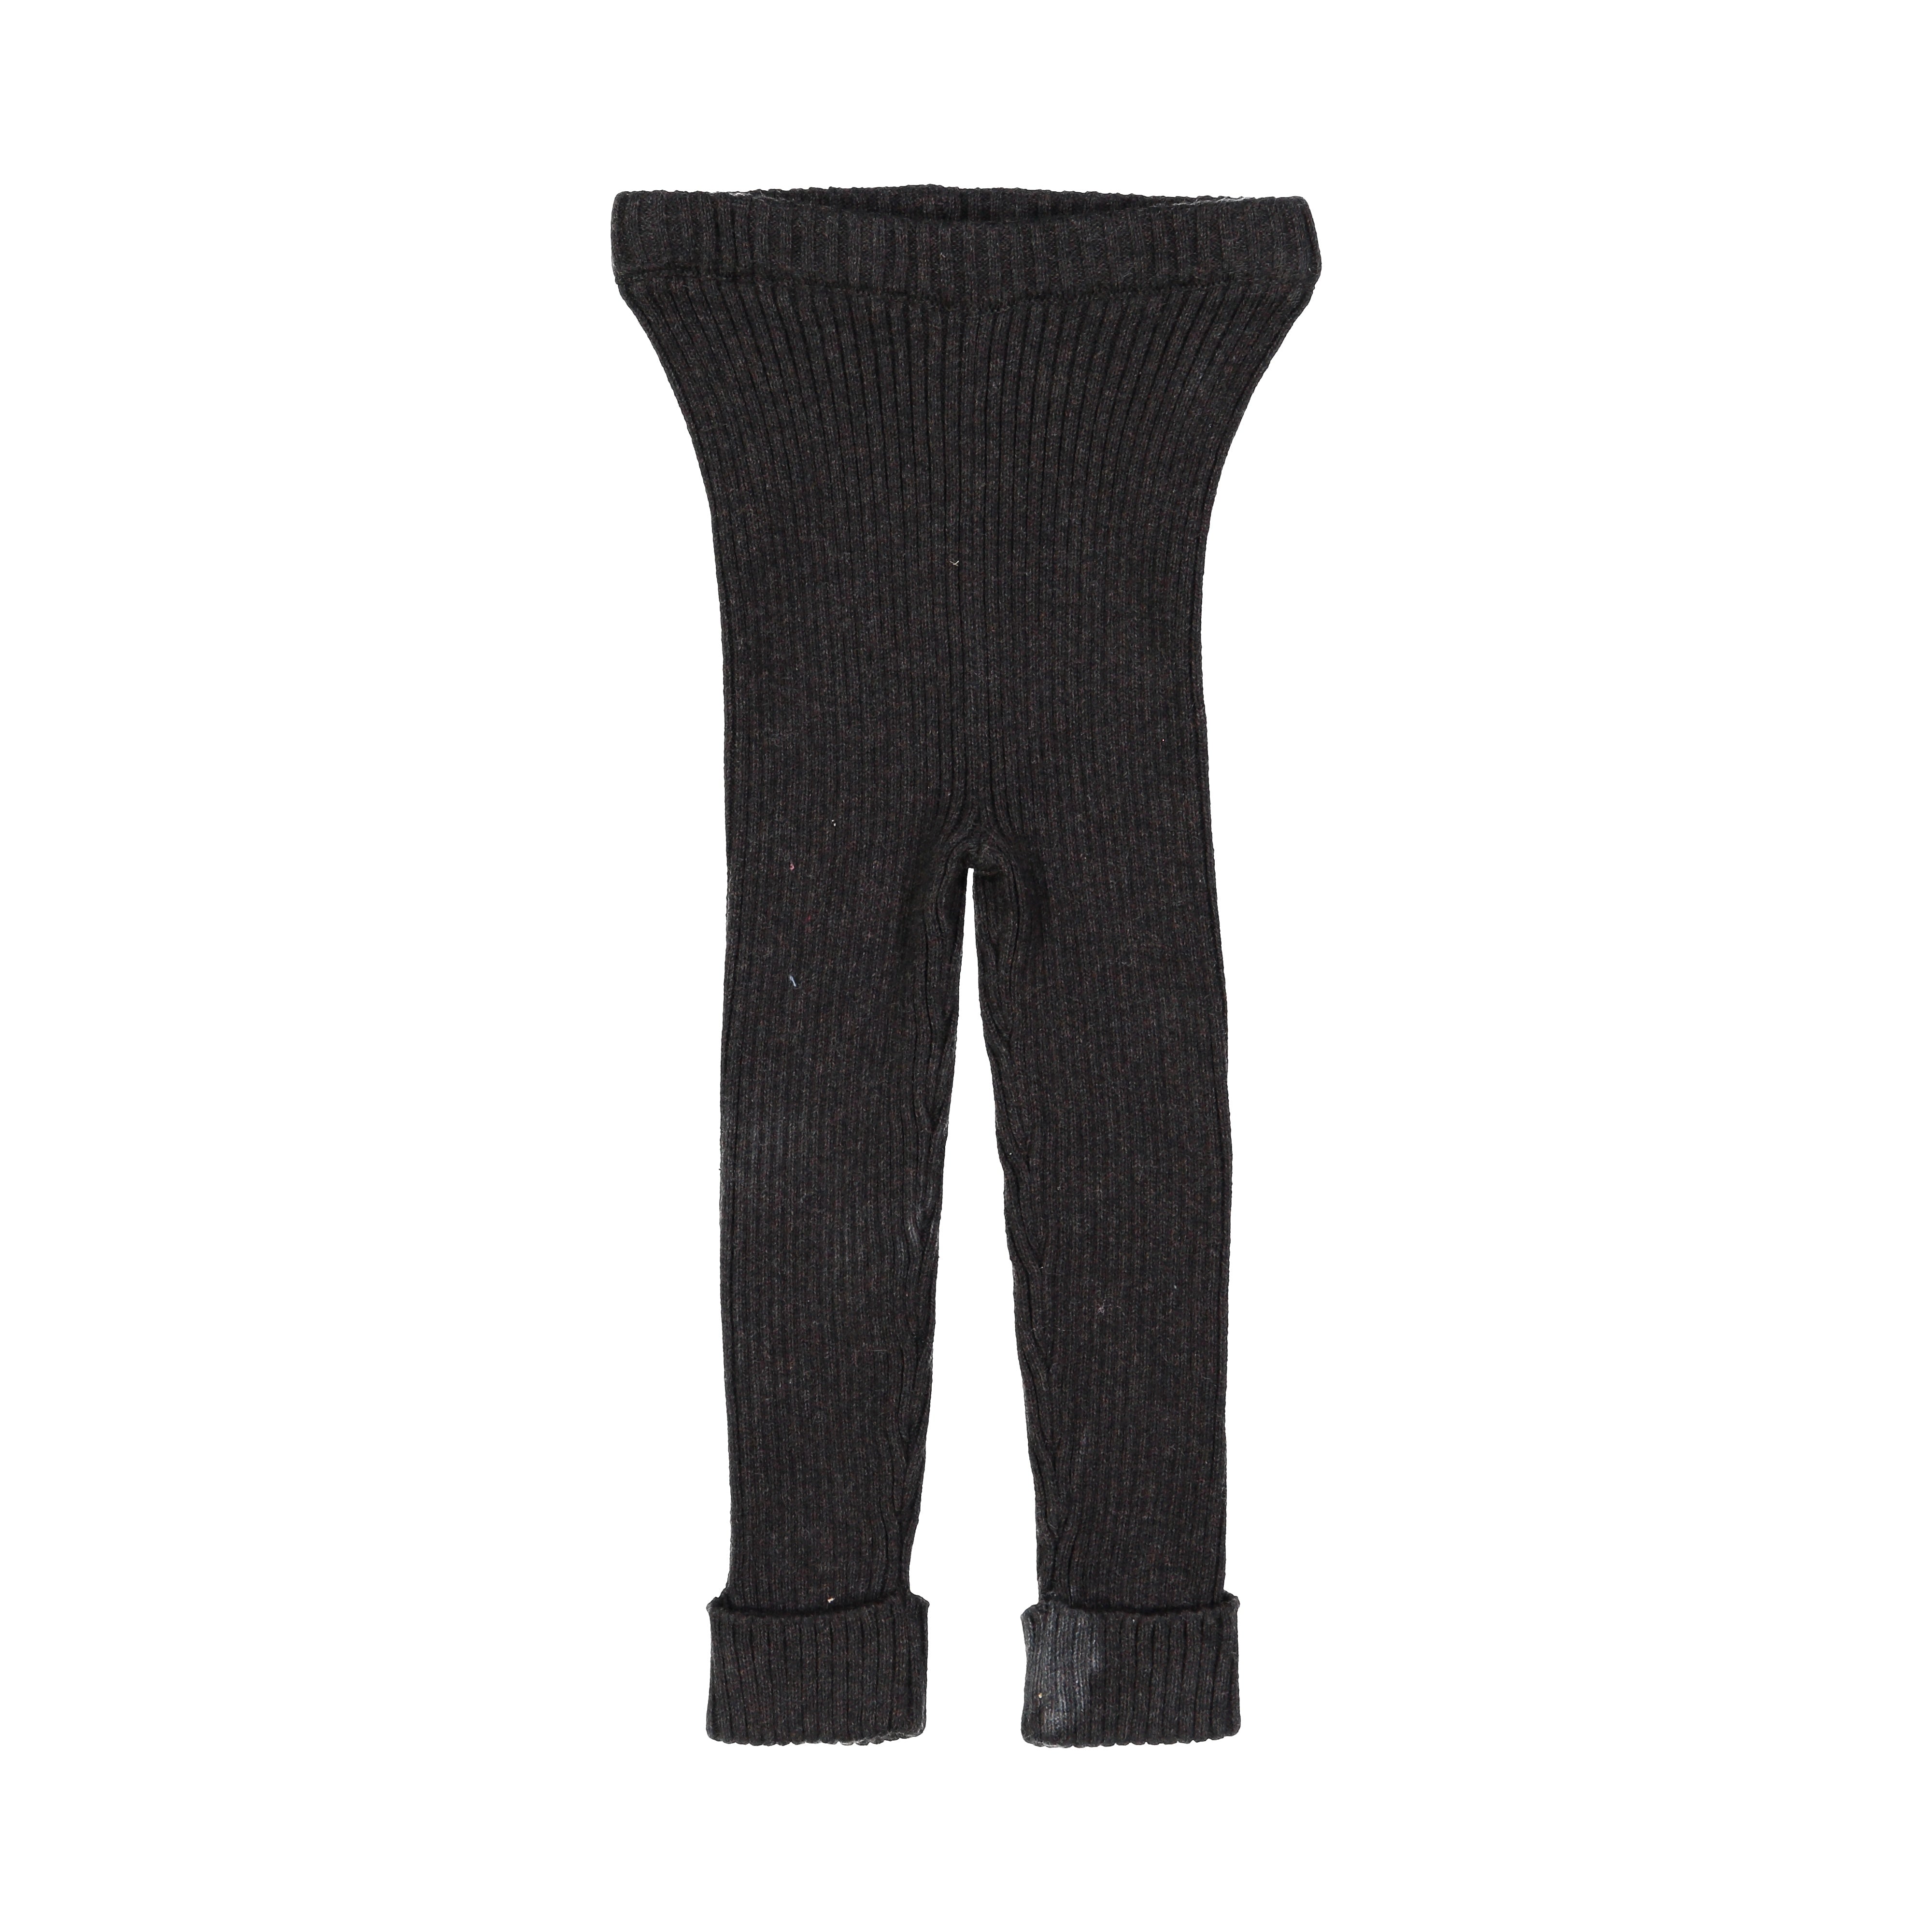 ANALOGIE BY LIL LEGS HEATHER GREY RIBBED KNIT LEGGINGS – BellaKidsNY